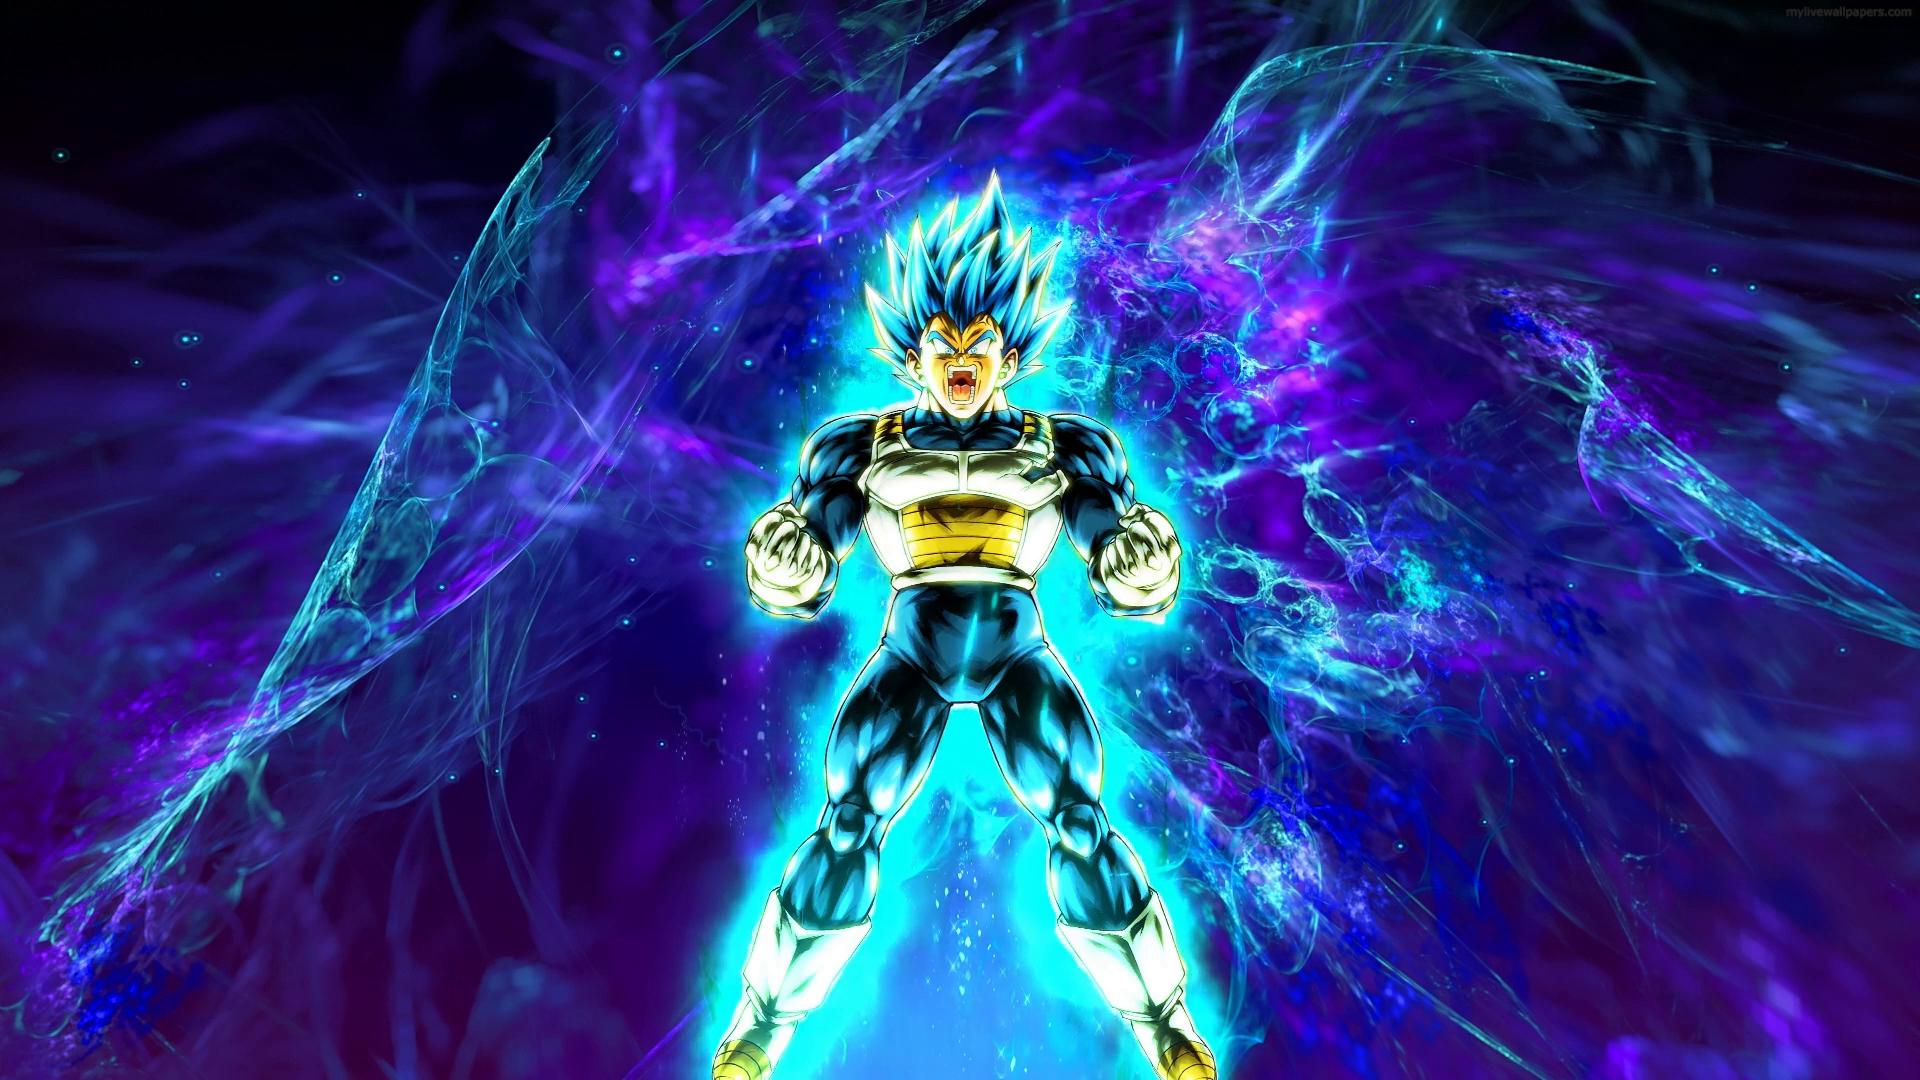 DRAGON BALL  Z  most awaited wallpapers of the era